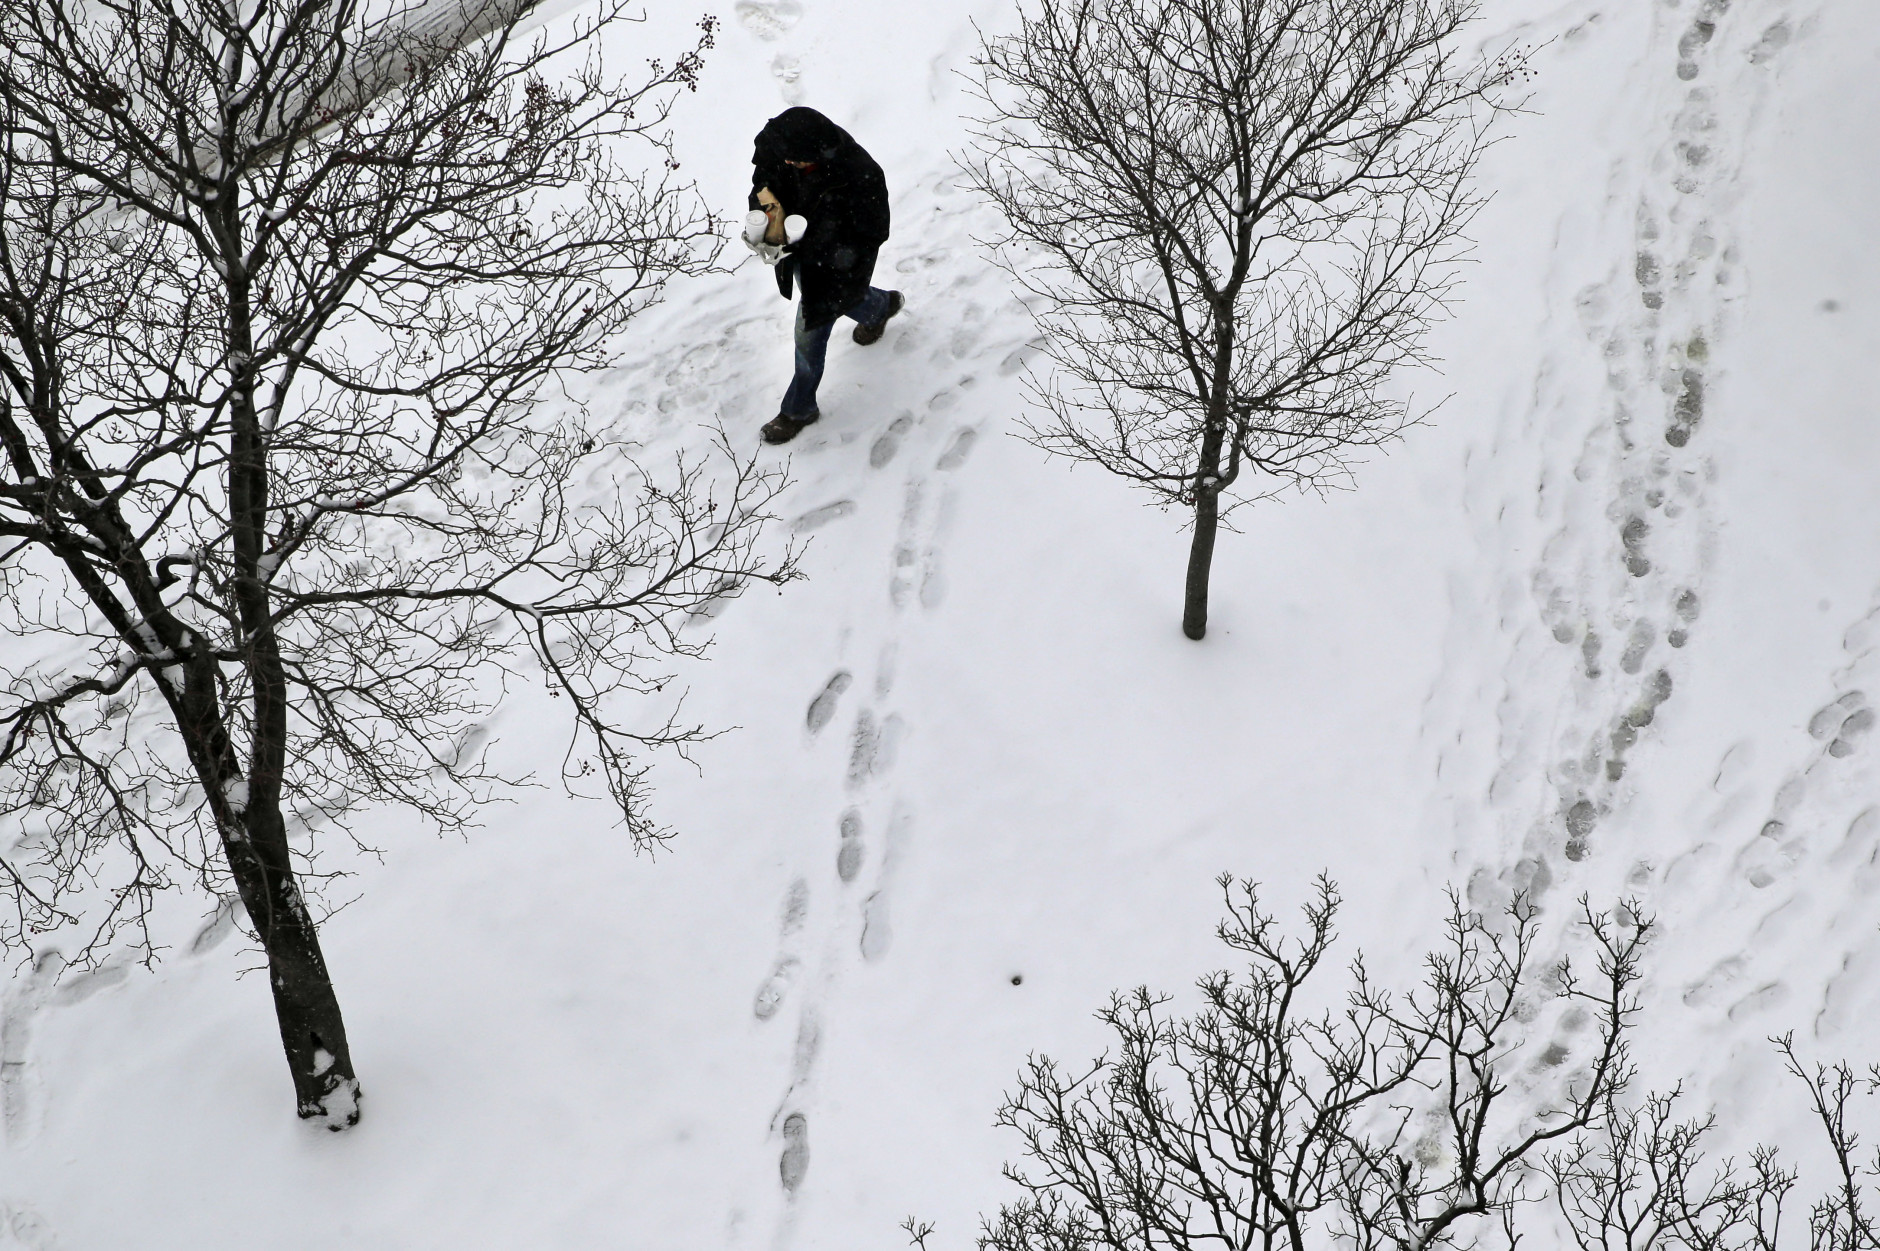 A man walks on a snow-covered sidewalk, Tuesday, Jan. 6, 2015, in Baltimore. The National Weather Service says snowfall totals could reach 4 to 6 inches in the Washington suburbs and 3 to 5 in the Maryland mountains. (AP Photo/Patrick Semansky)